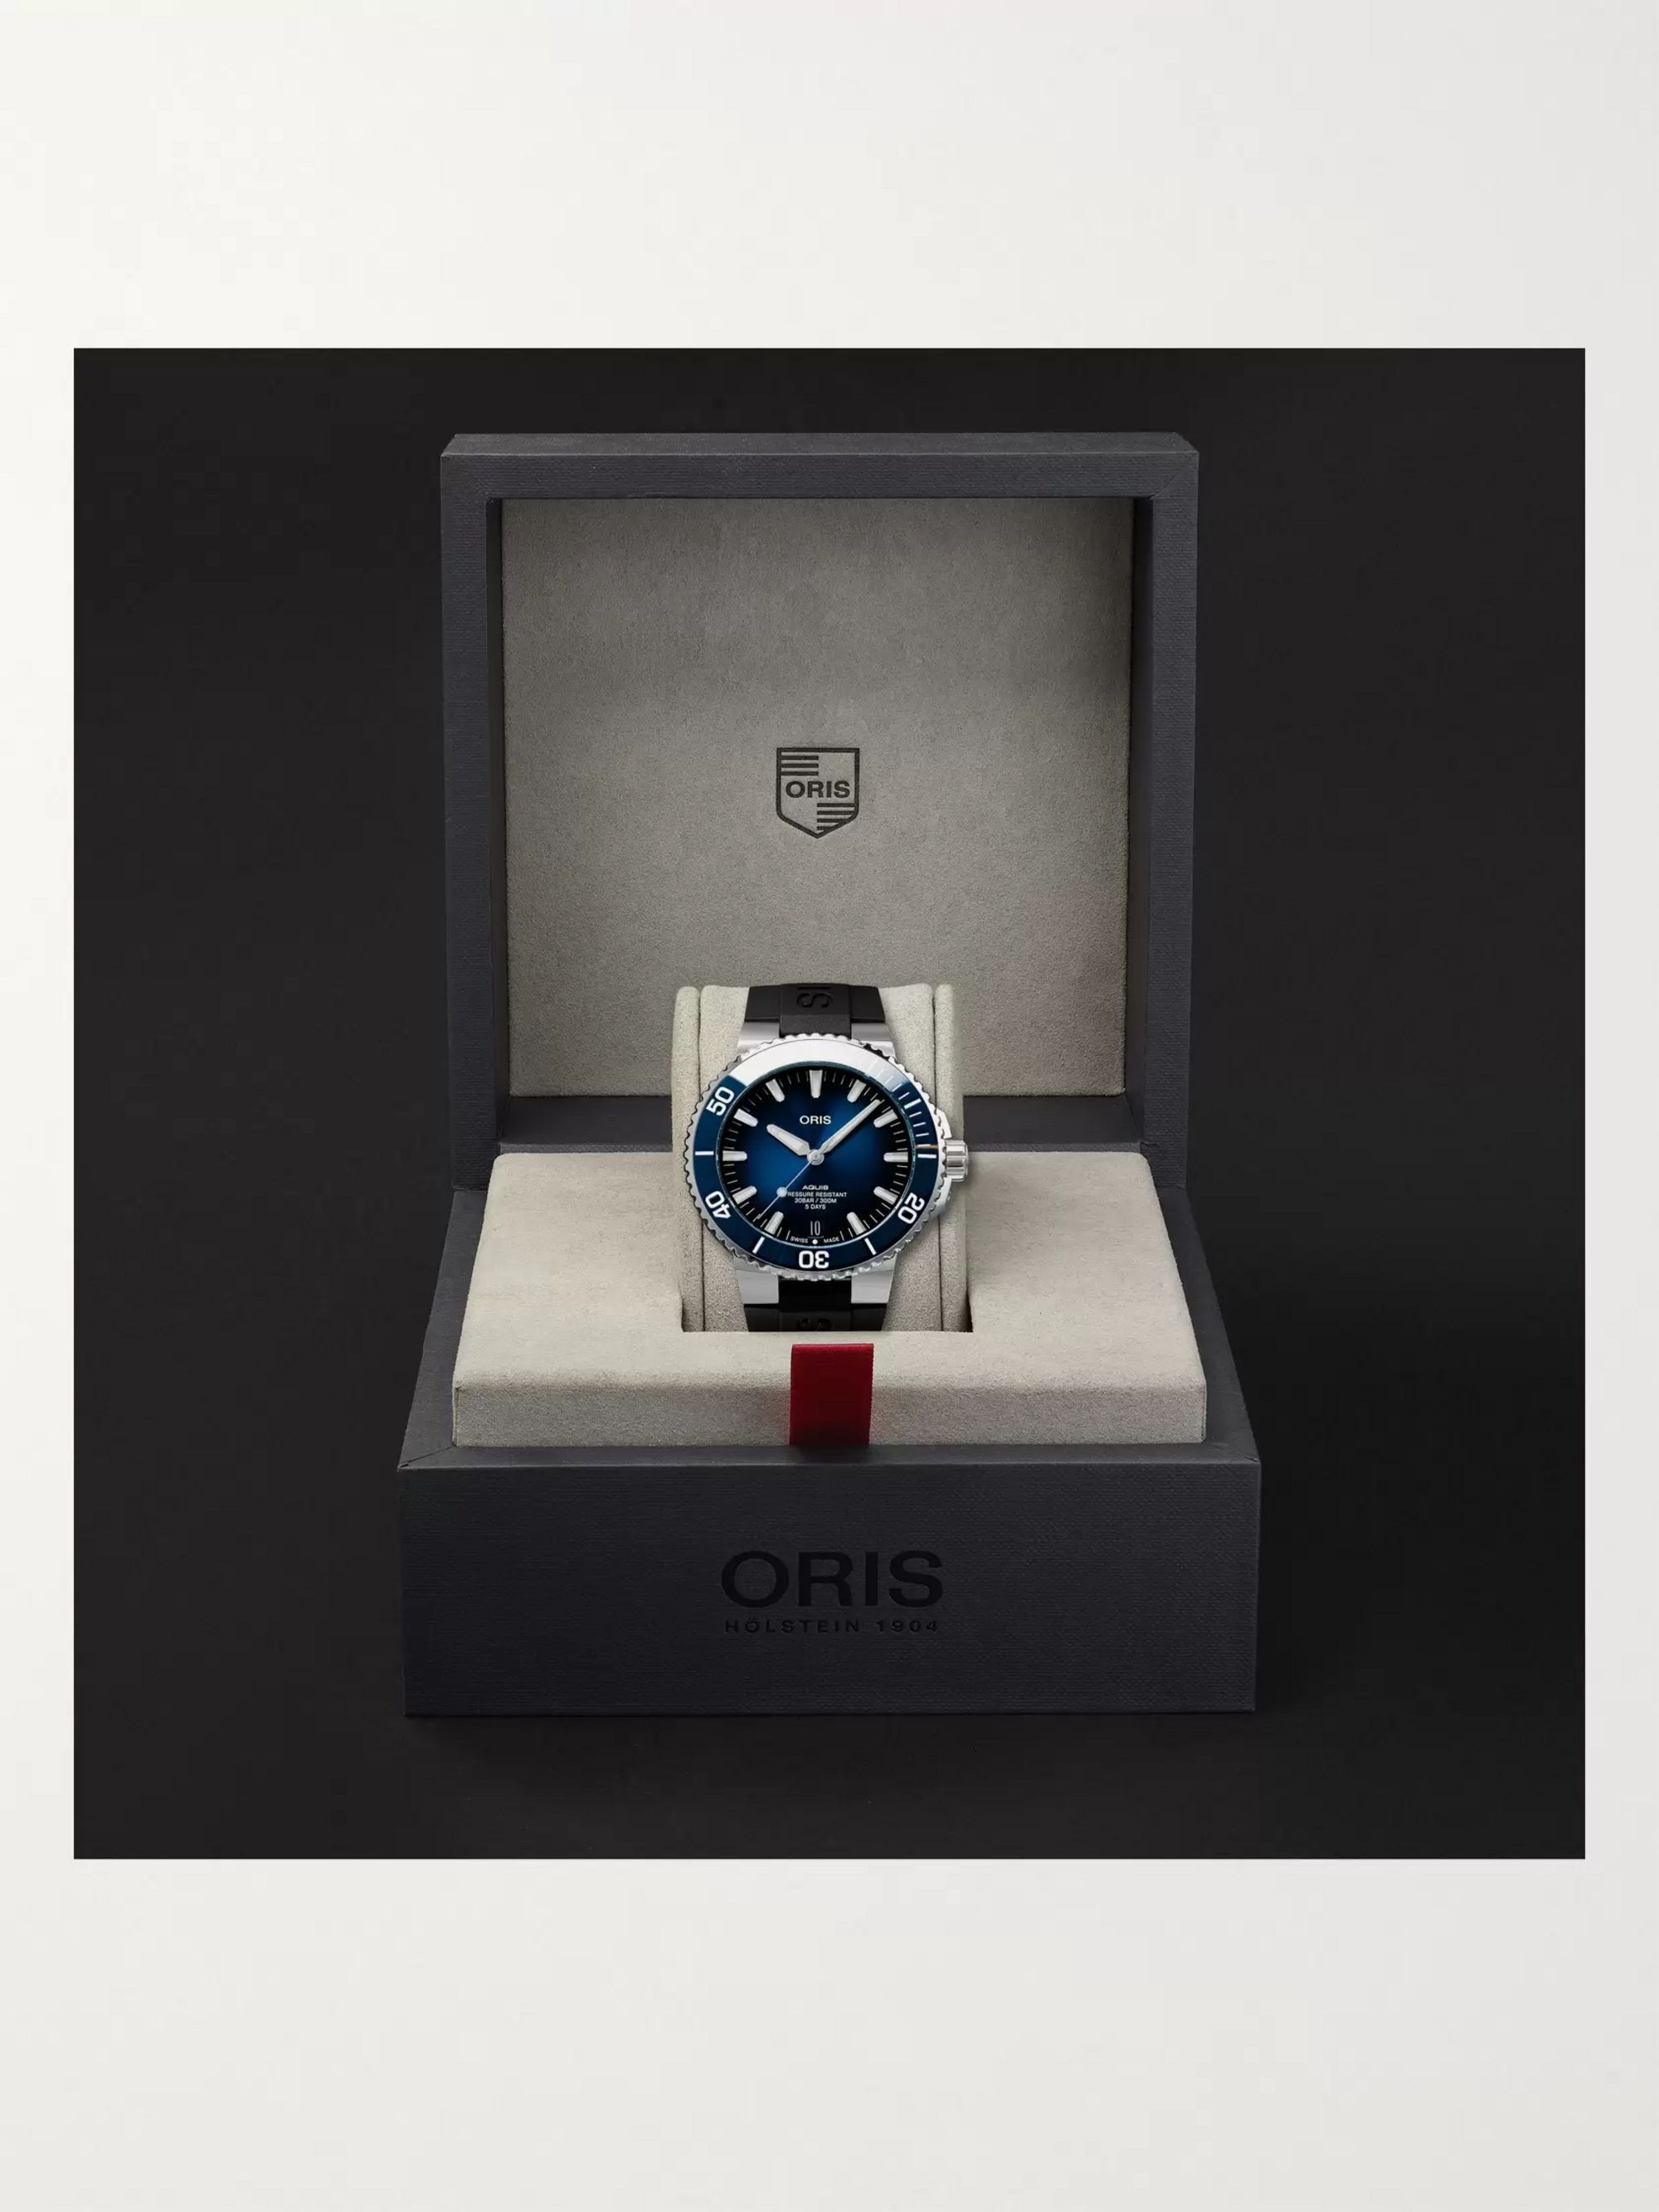 ORIS Aquis Date Calibre 400 Automatic 43.5mm Stainless Steel and Rubber Watch, Ref. No. 01 400 7763 4135-07 4 24 74EB